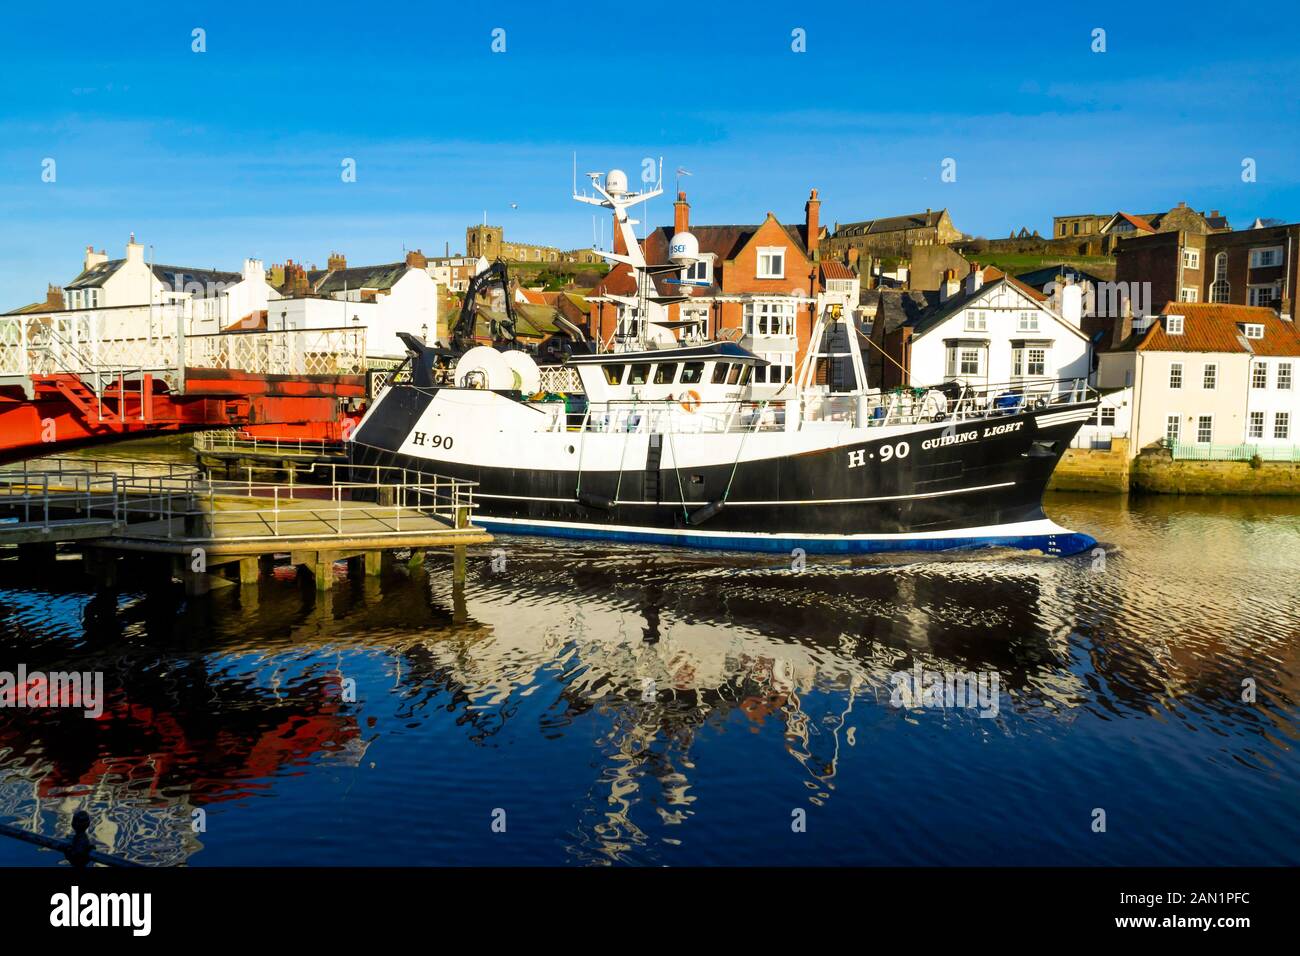 A fishing boat  H90 called 'Guiding Light' passing through the  Whitby Swing Bridge on its way into port Stock Photo